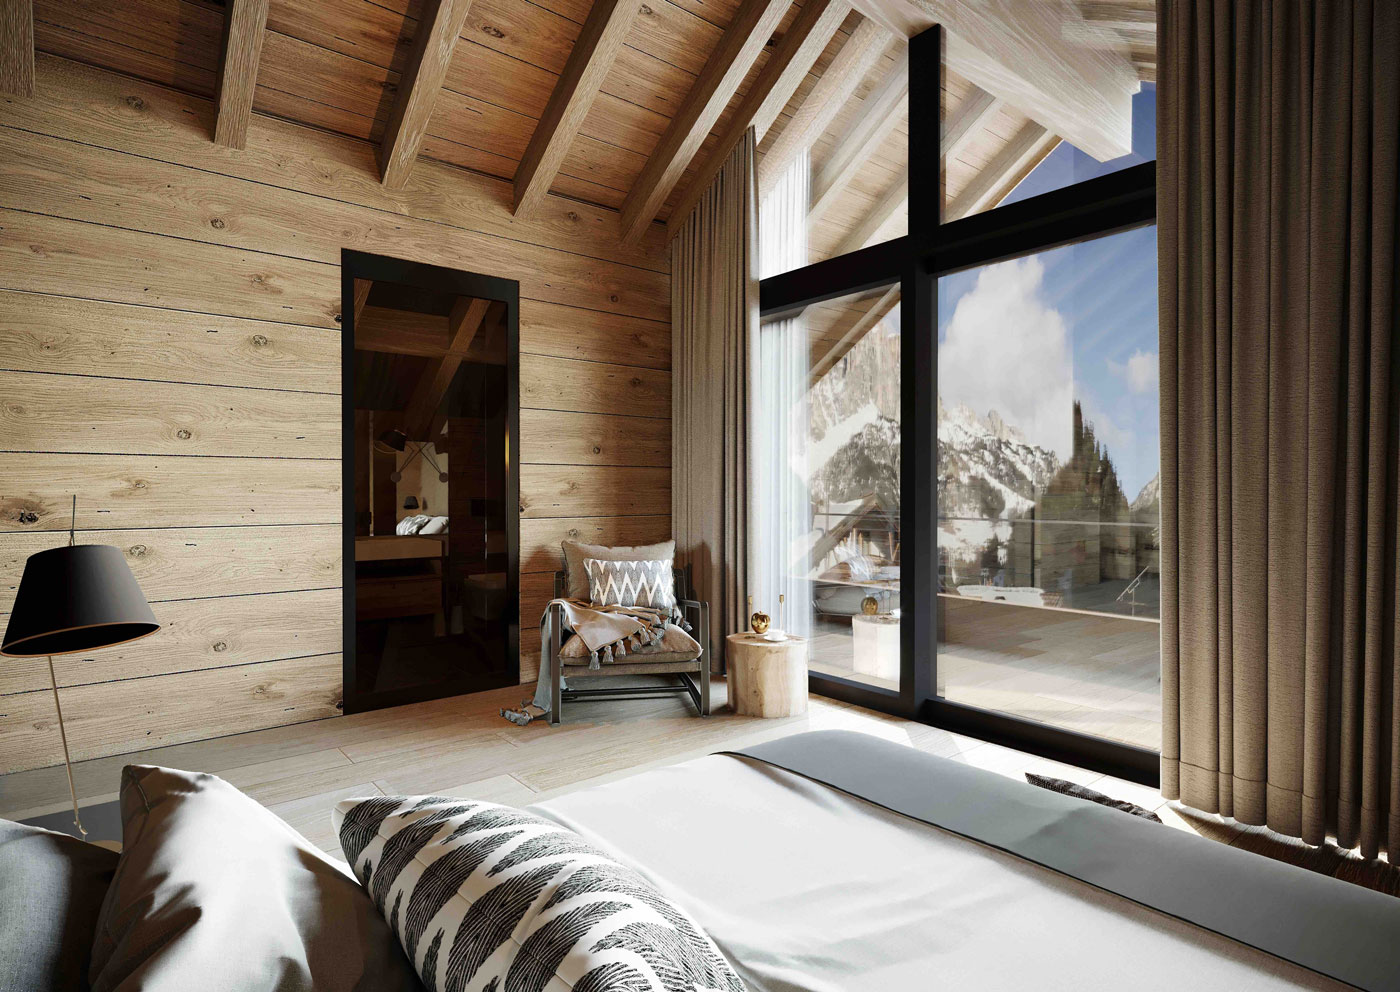 Chalet Valbuna, Luxury Chalet Penthouse in Corvara in Badia, in the Dolomites • South Tyrol, Italy | Tirelli & Partners • Finest Residences